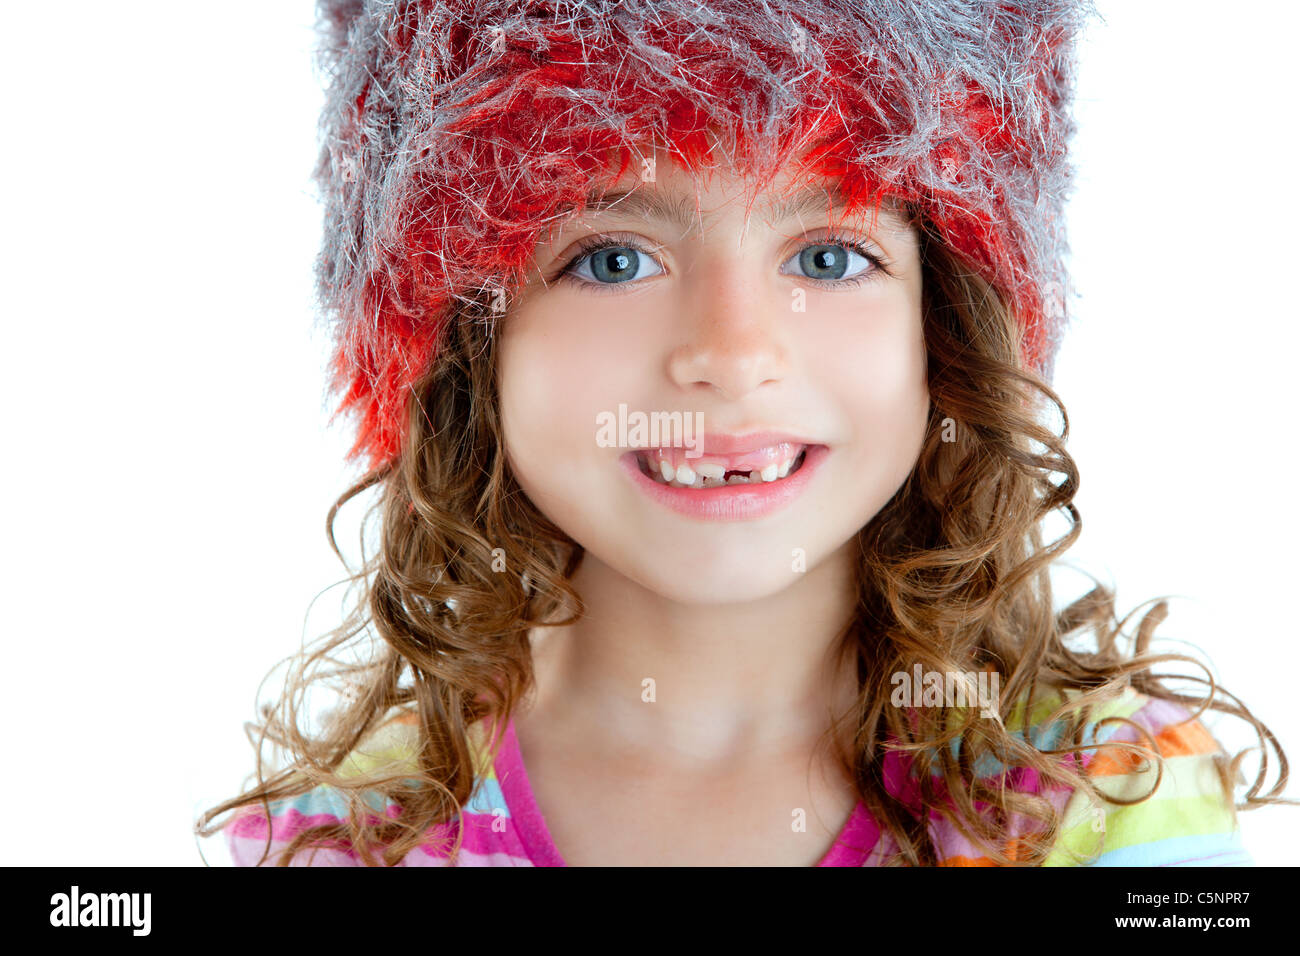 Children little girl with winter fur cap red and silver in white background Stock Photo